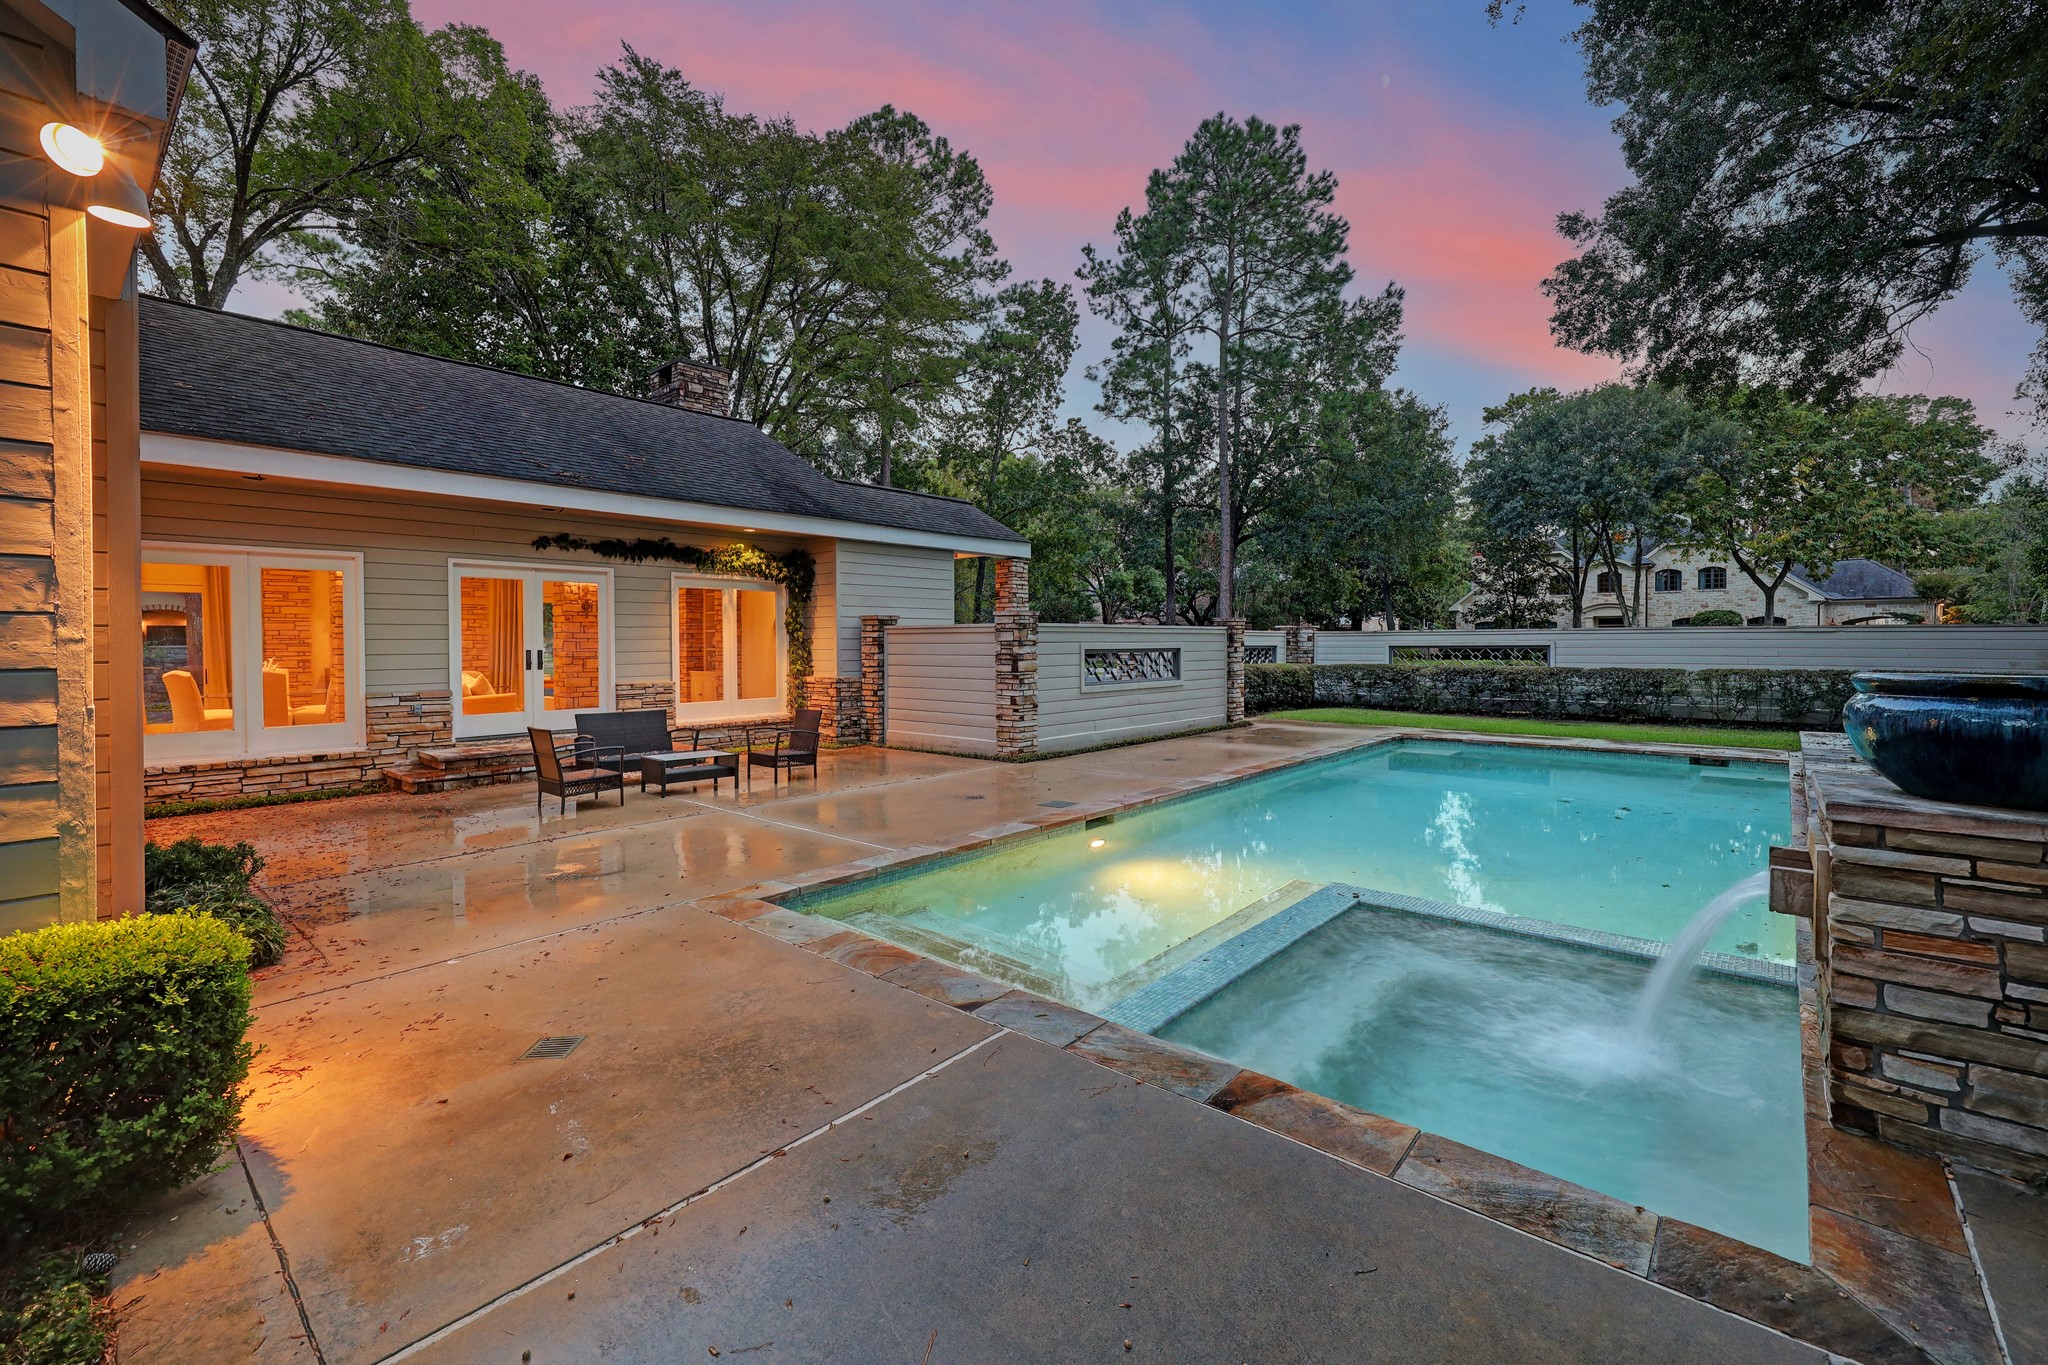 View of the large pool and attached spa and spacious outdoor patio space